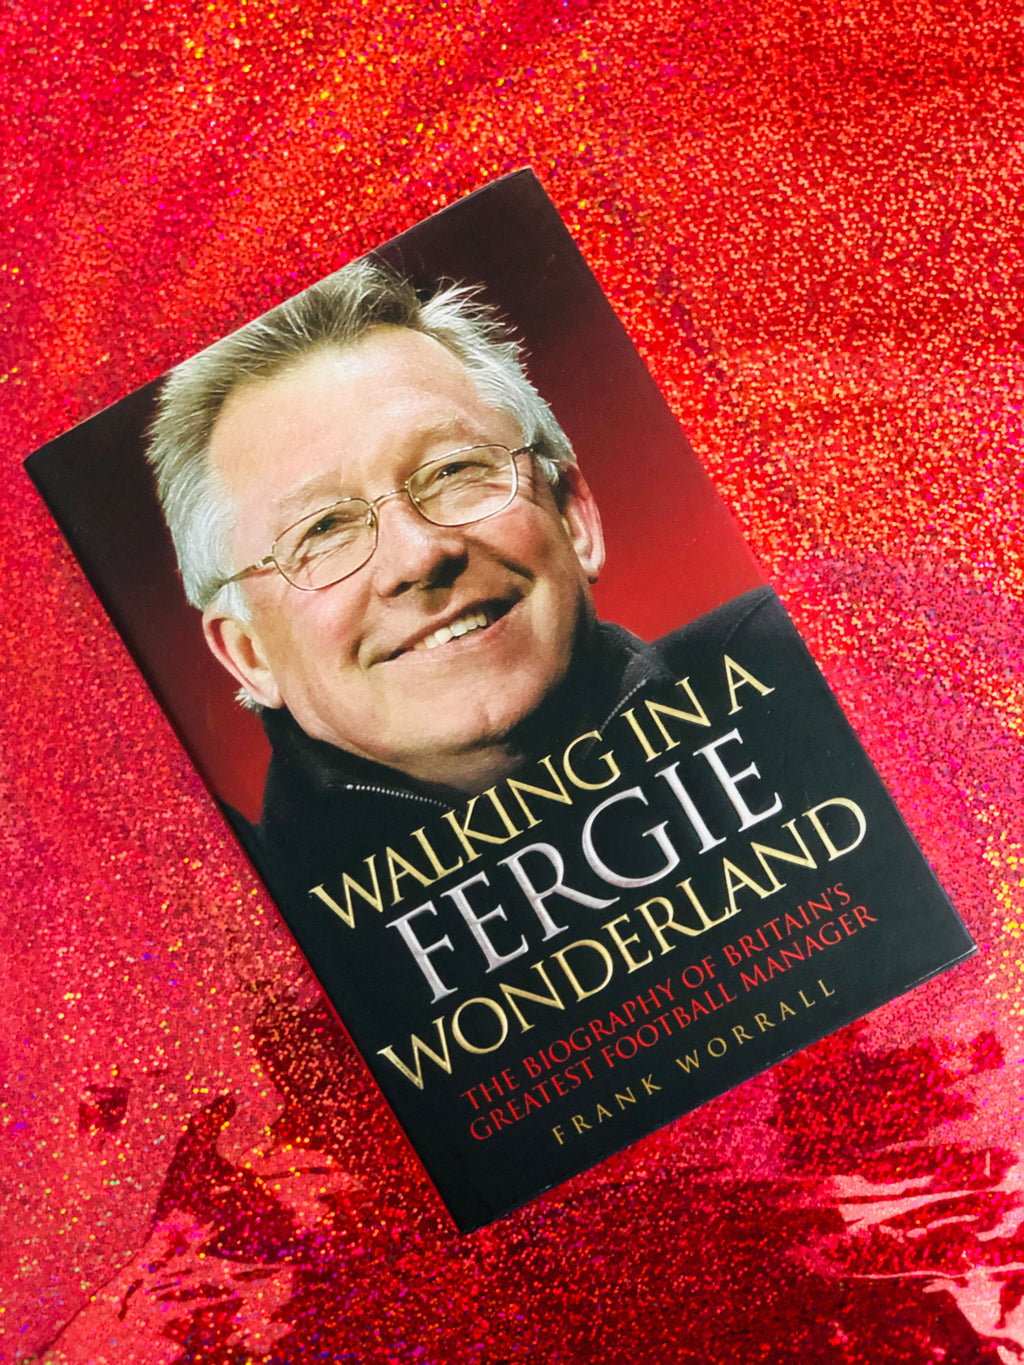 Walking In A Fergie Wonderland, the Biography Of Britain's Greatest Football Manager by Frank Worrall